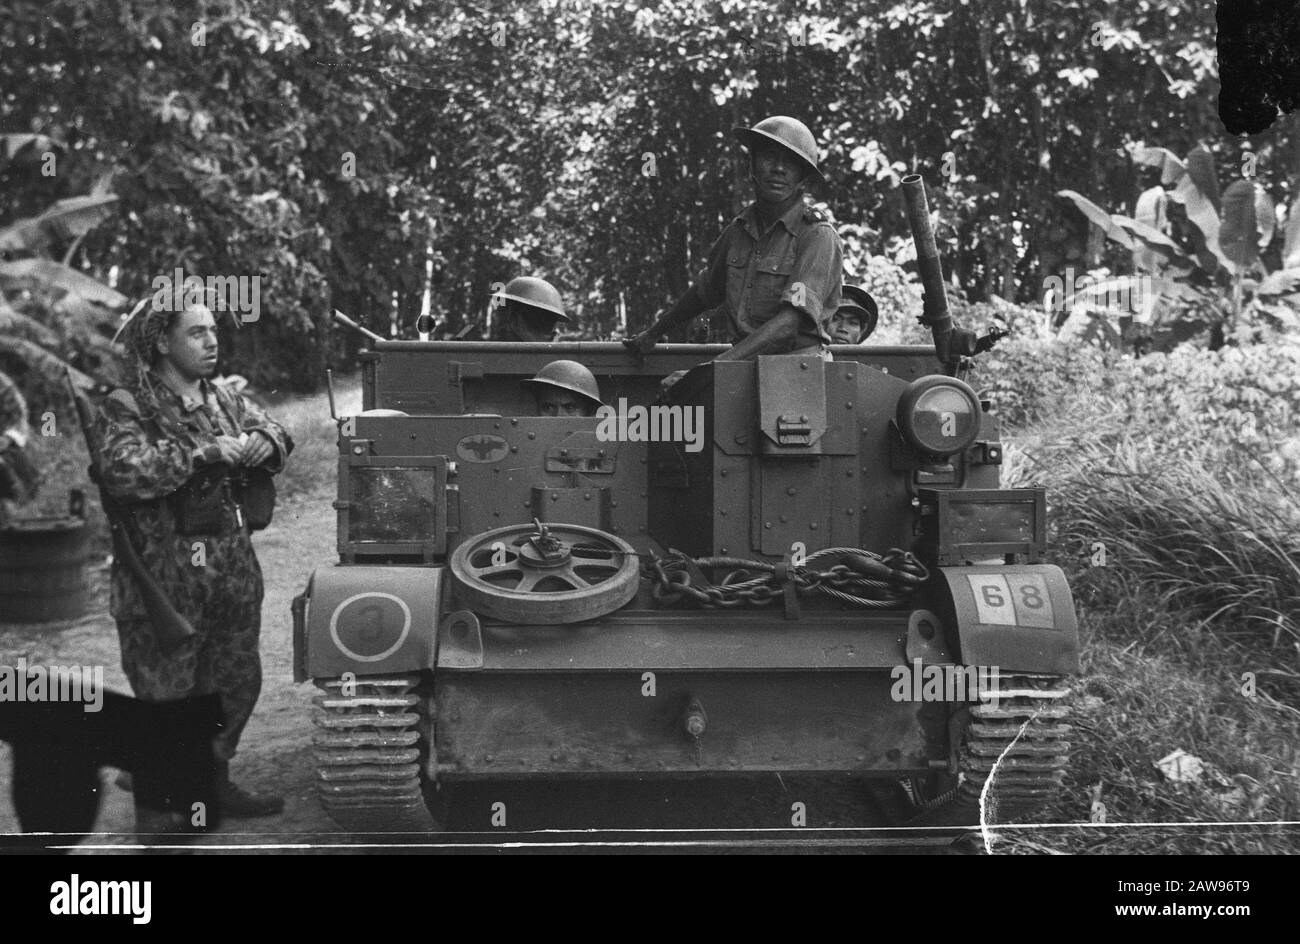 KNIL Bren carrier with crew [VI KNIL Infantry Gagak Hitam] Date: 01/01/1947 Location: Indonesia Dutch East Indies Stock Photo